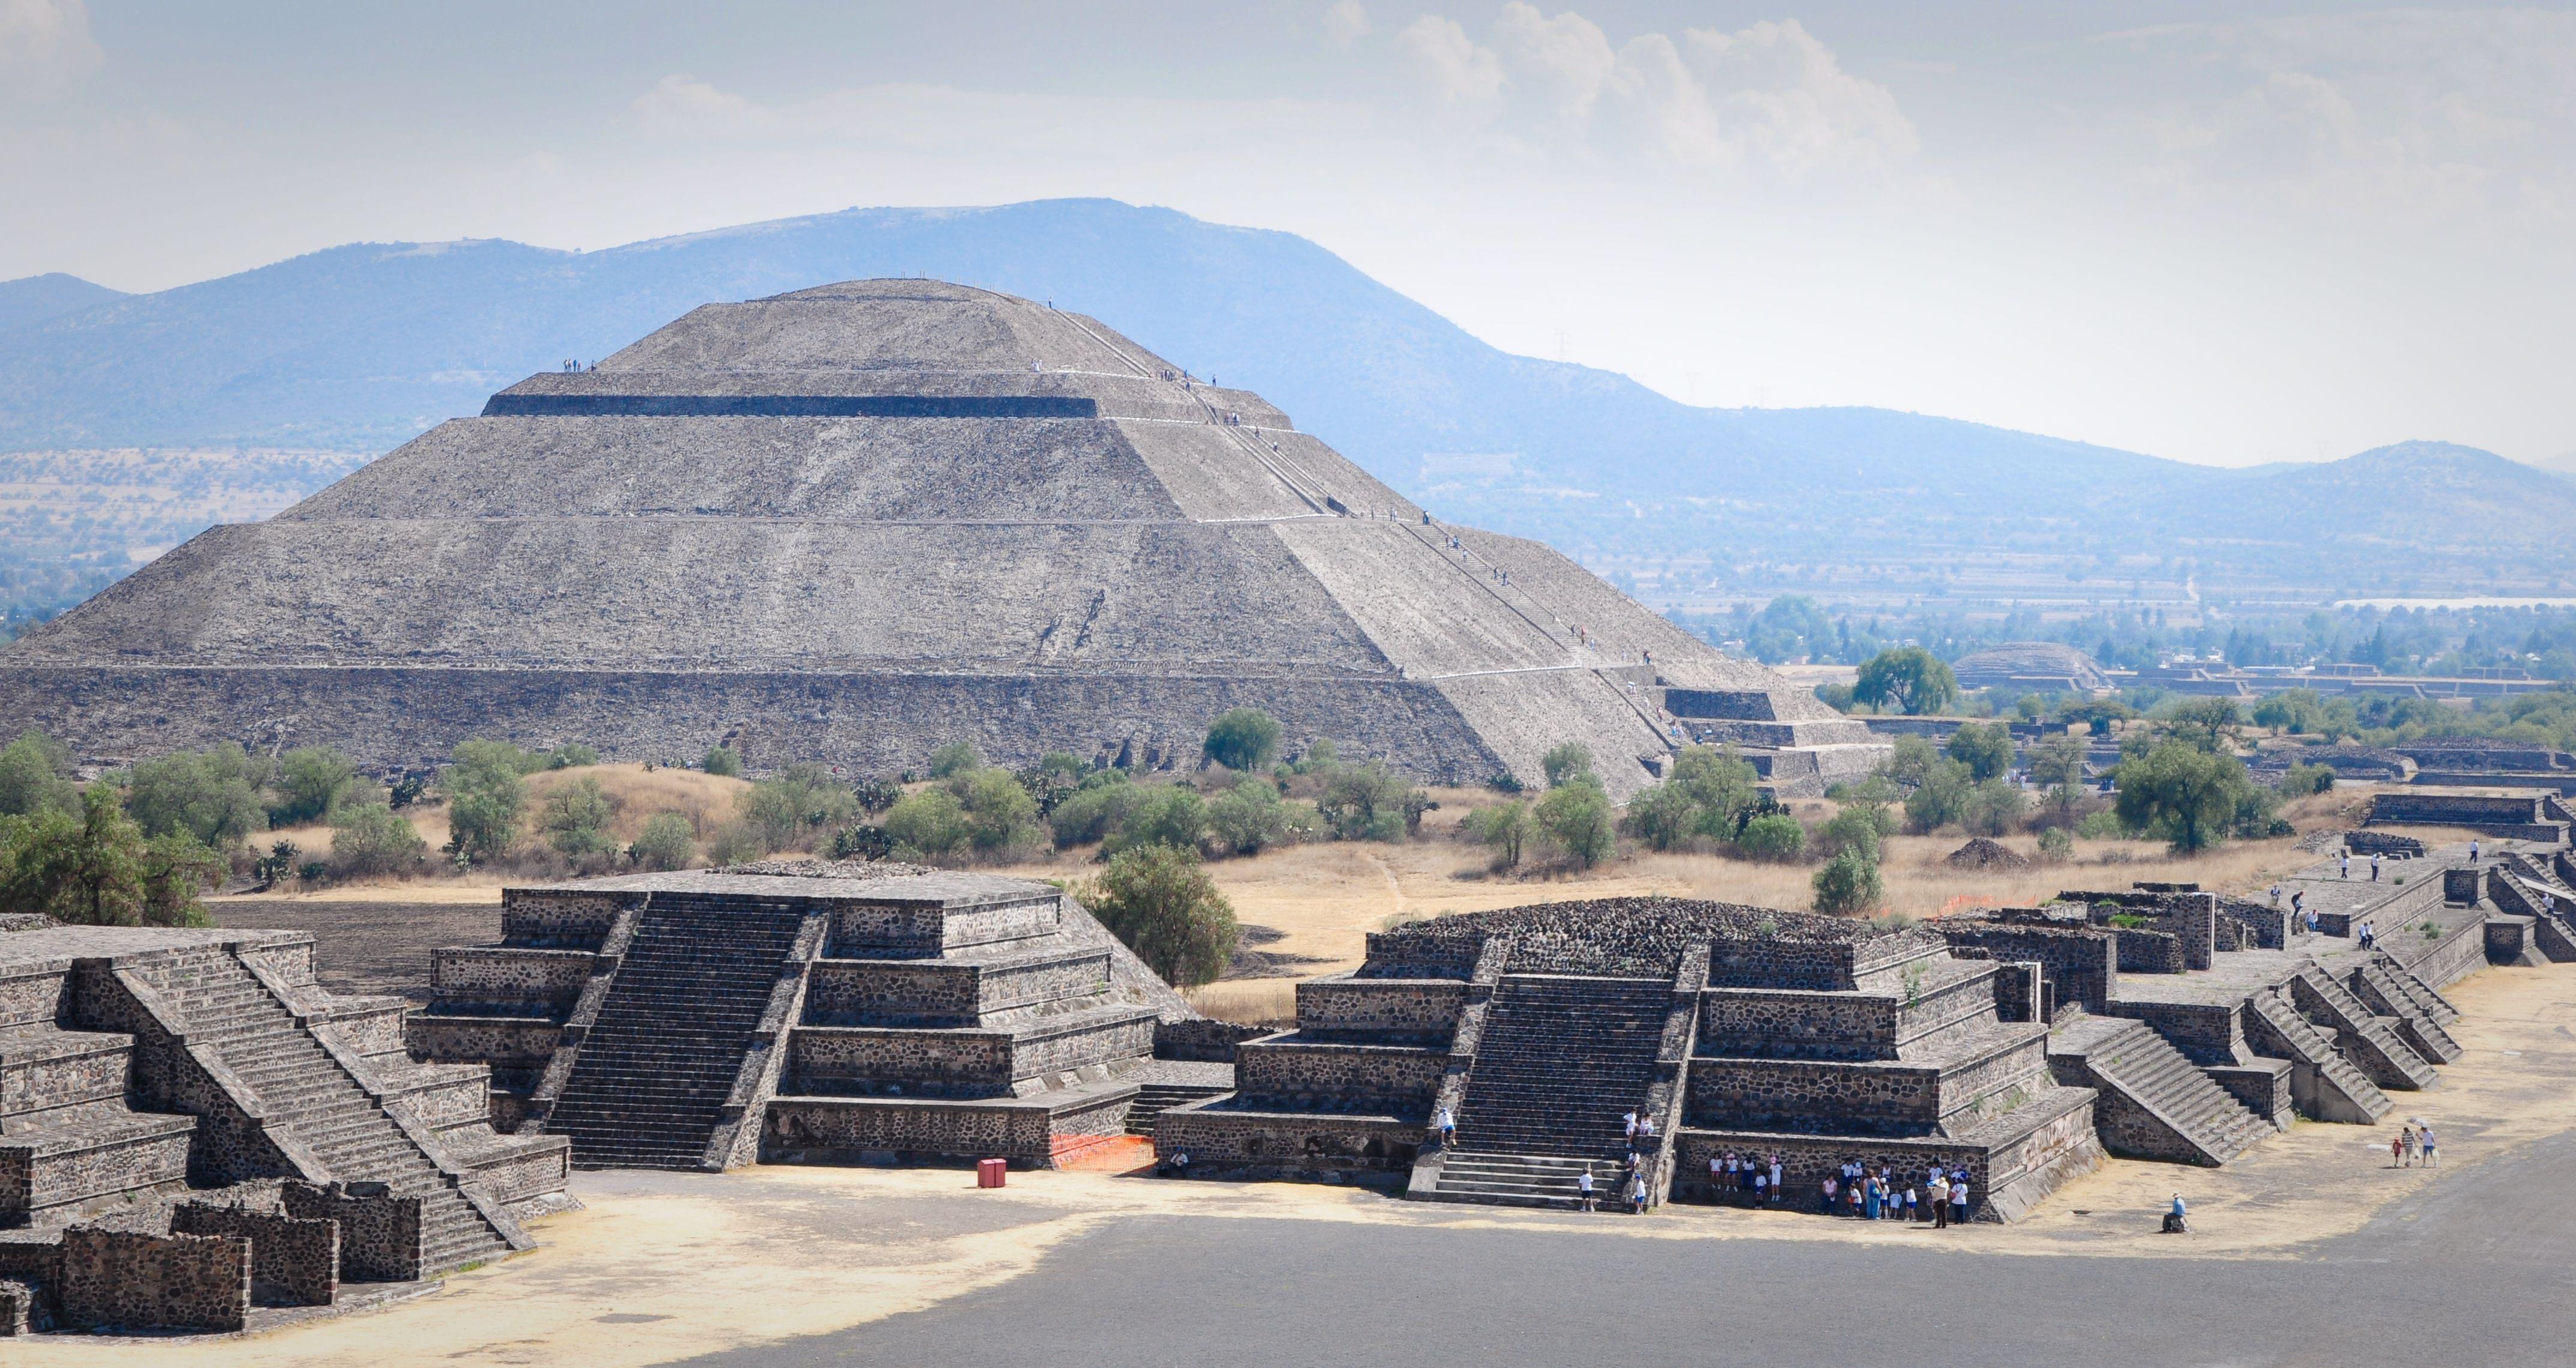 Teotihuacan Afternoon Tour